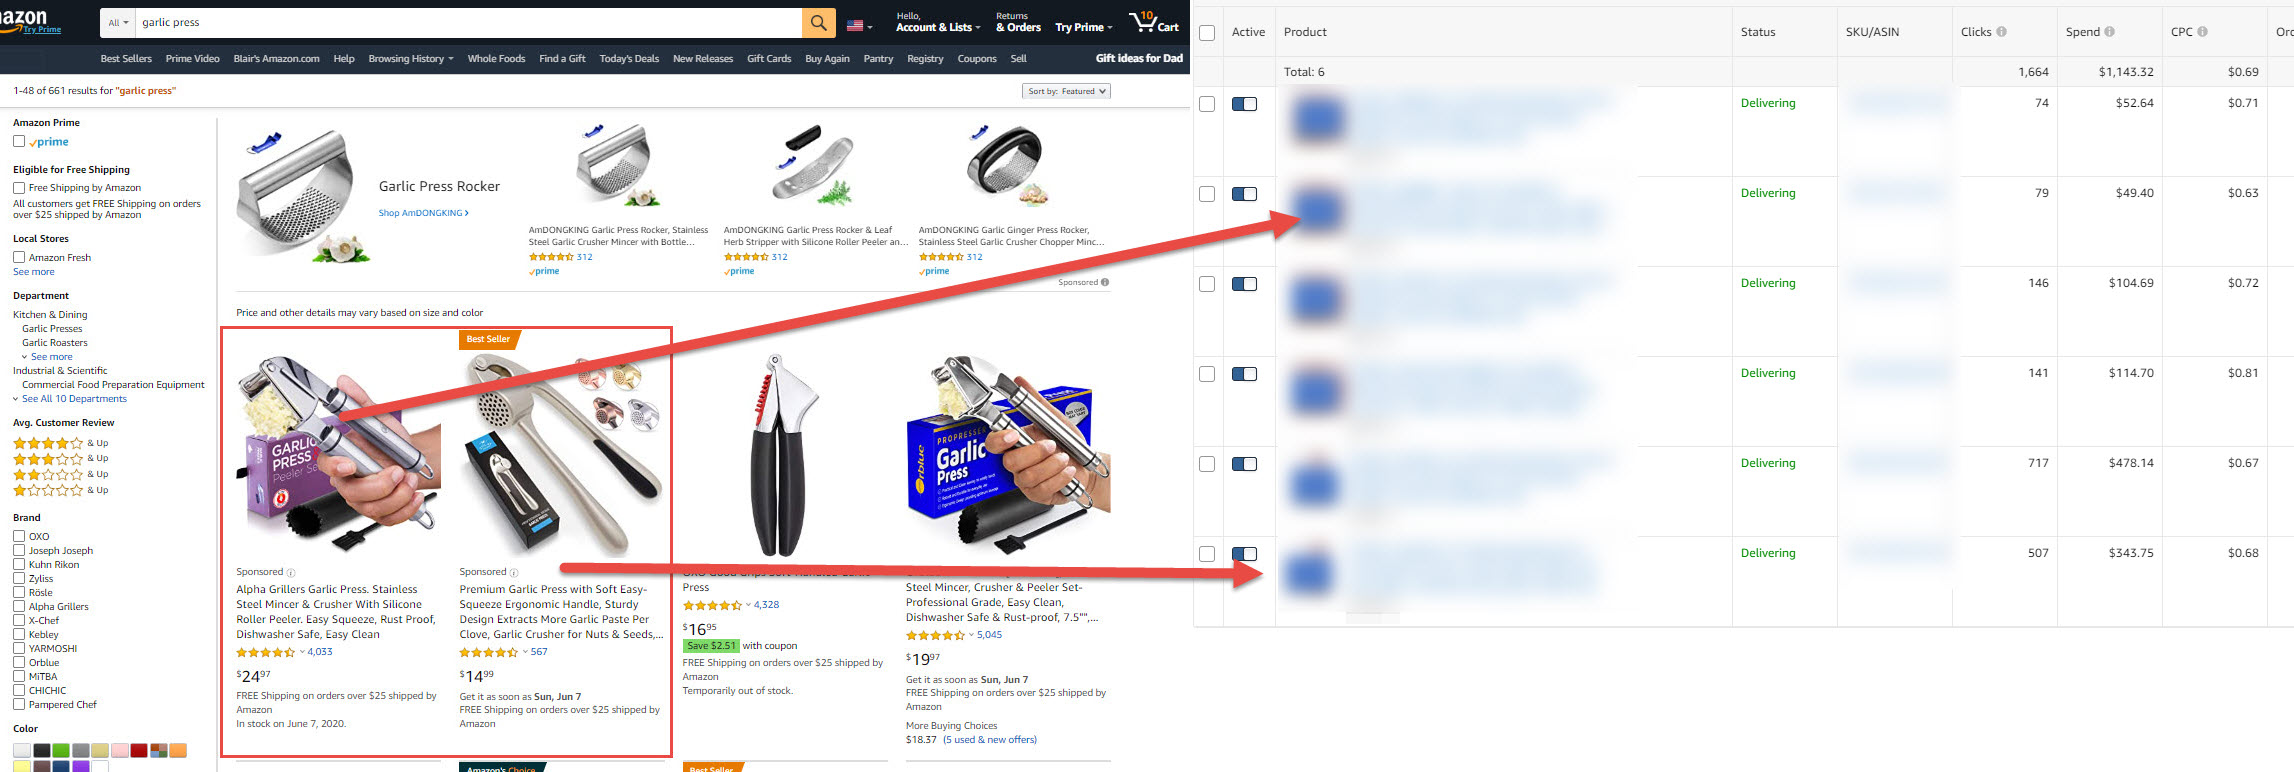 How To Source the Campaign / Adgroup for your Sponsored Product Ads